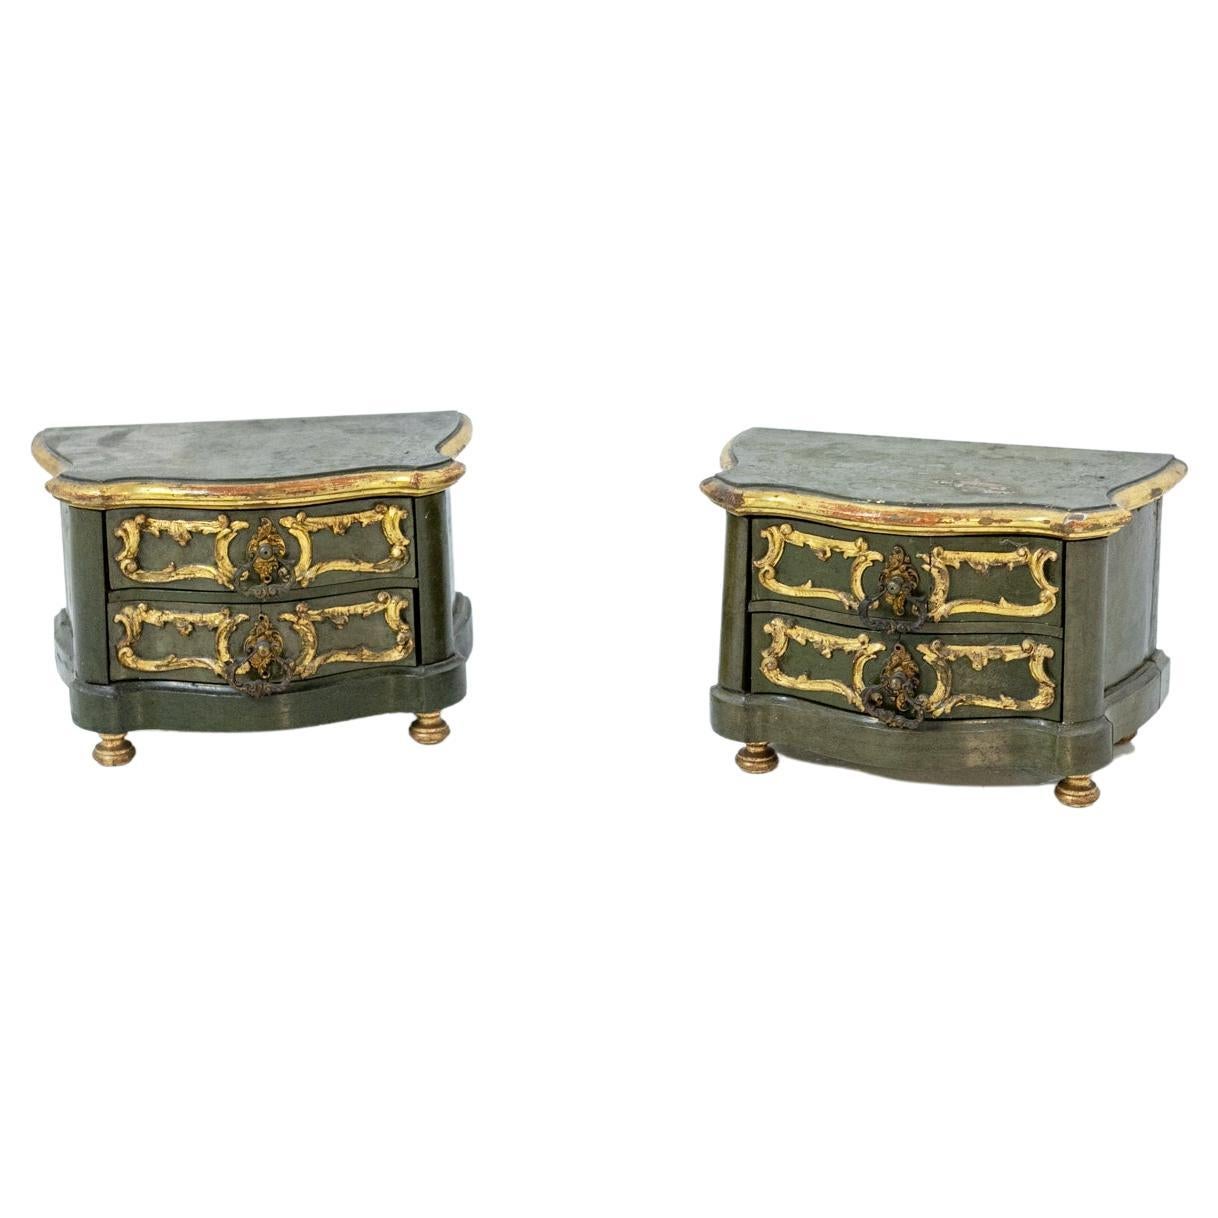 Pair of Vintage Gold Lacquered Wood Jewel Boxes For Sale